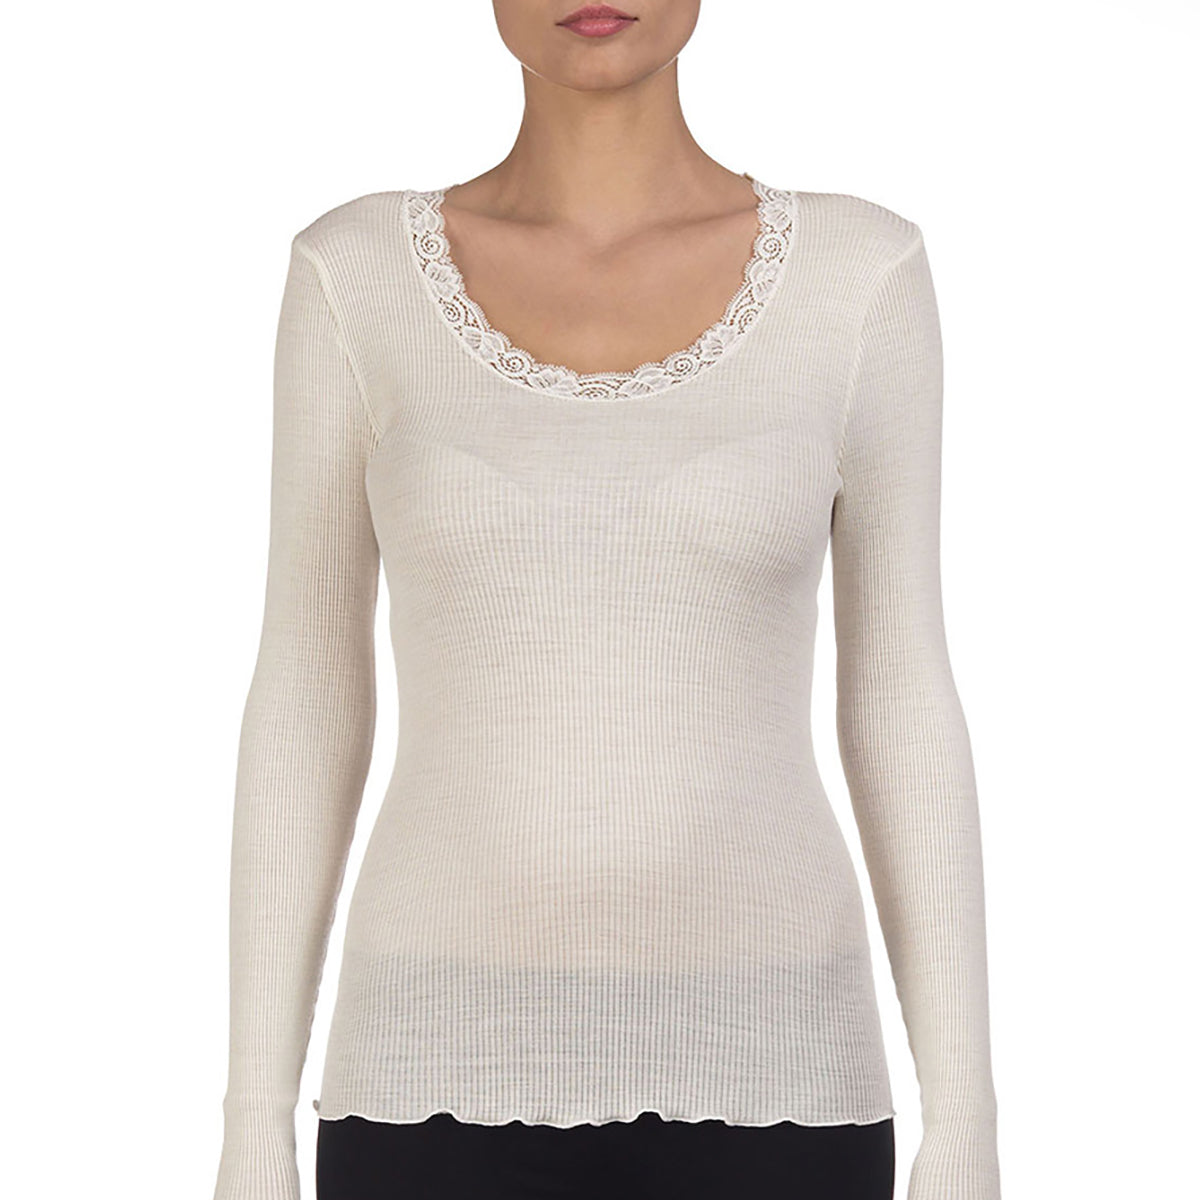 Oscalito Long Sleeve Top in Natural